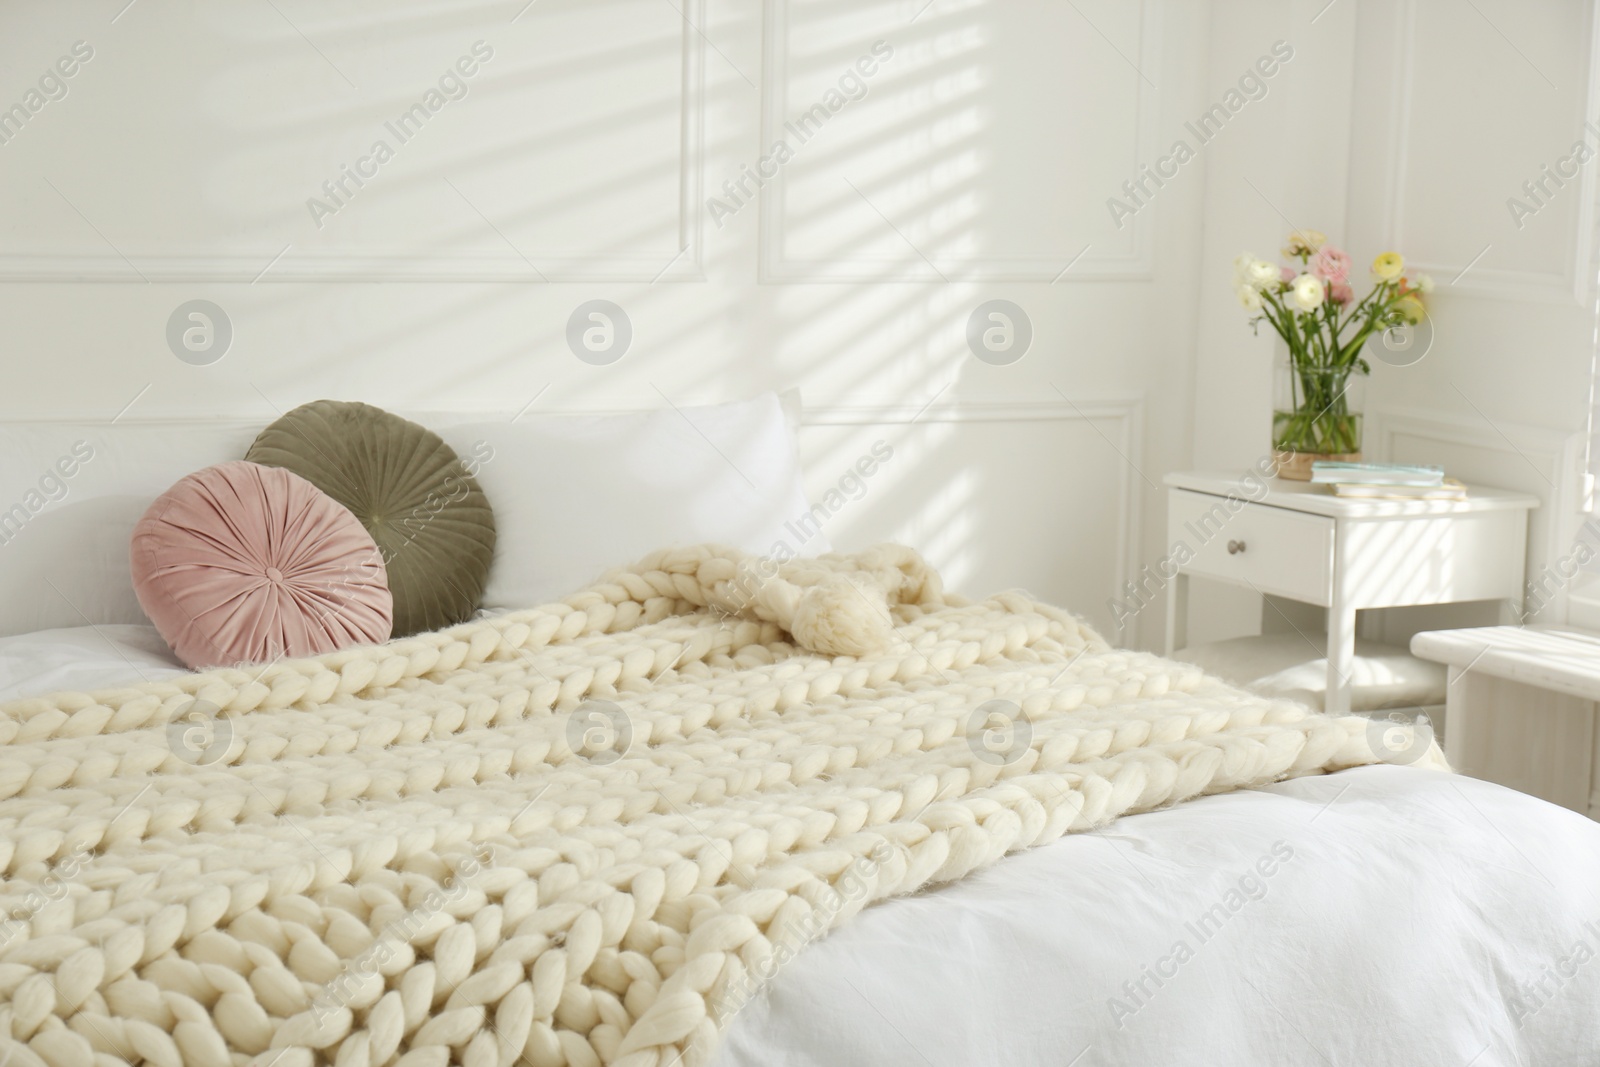 Photo of Knitted merino wool plaid on bed indoors. Interior design